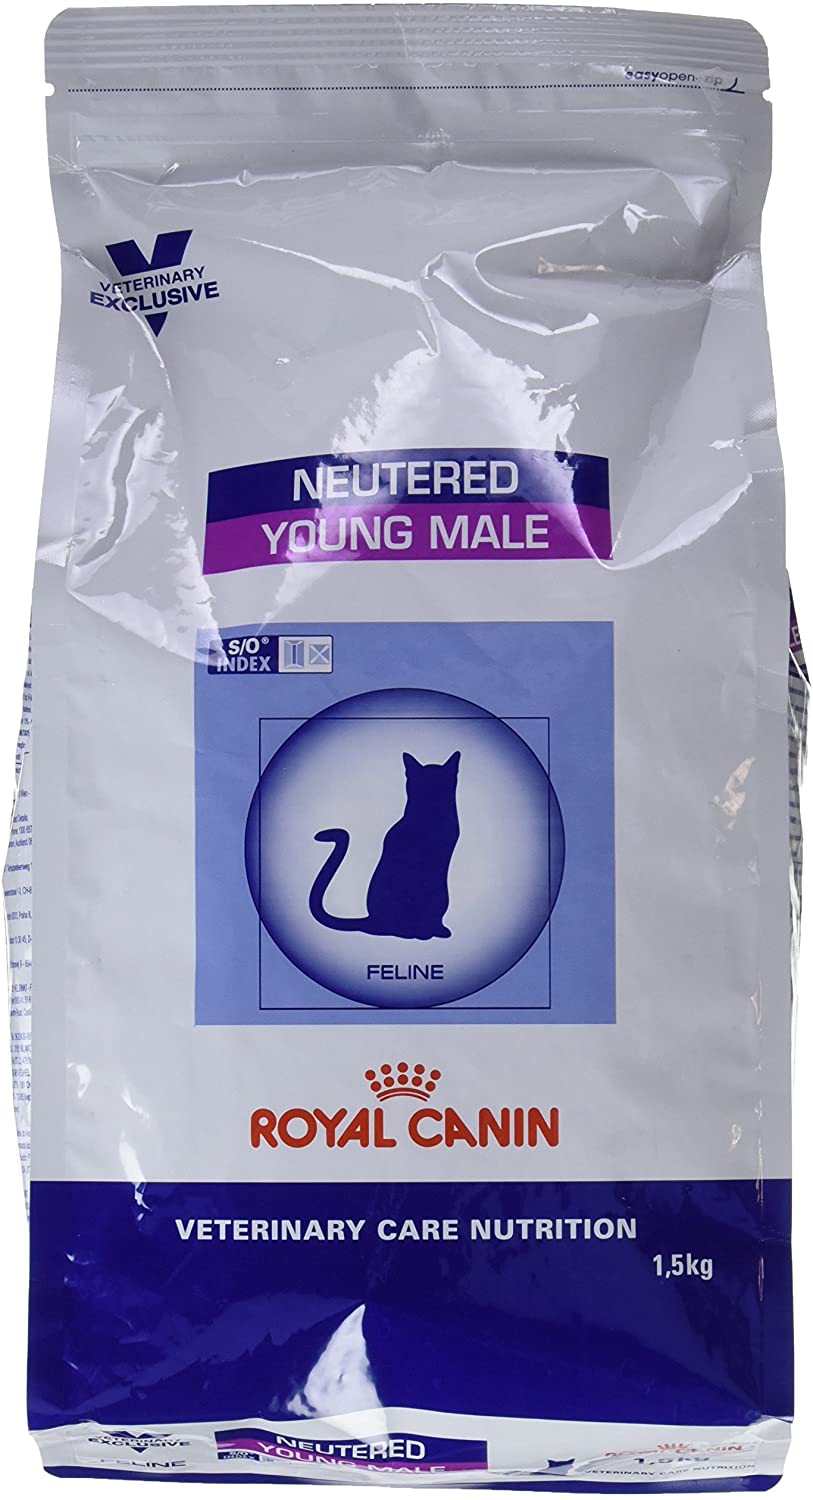  Royal Canin C-58334 Diet Feline Young Male - 3.5 Kg 